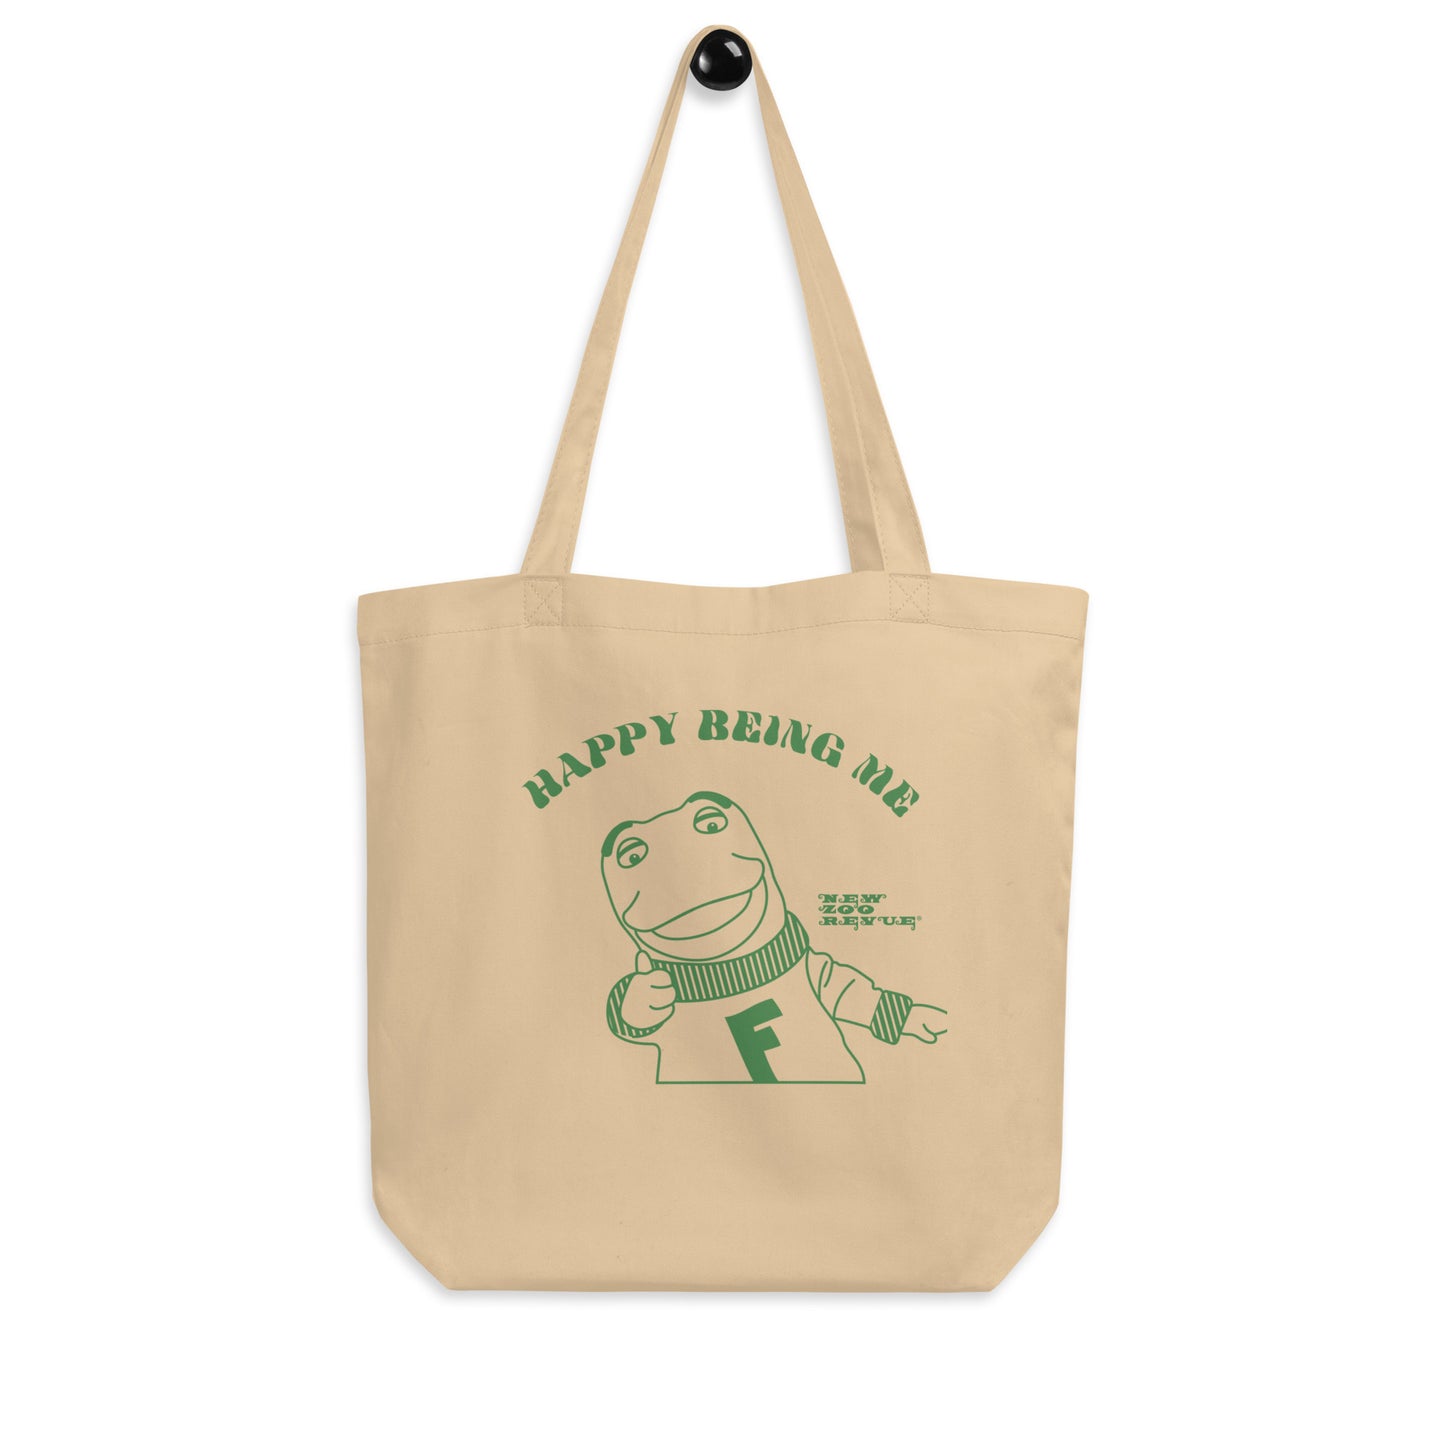 Retro Happy Being Me Tote